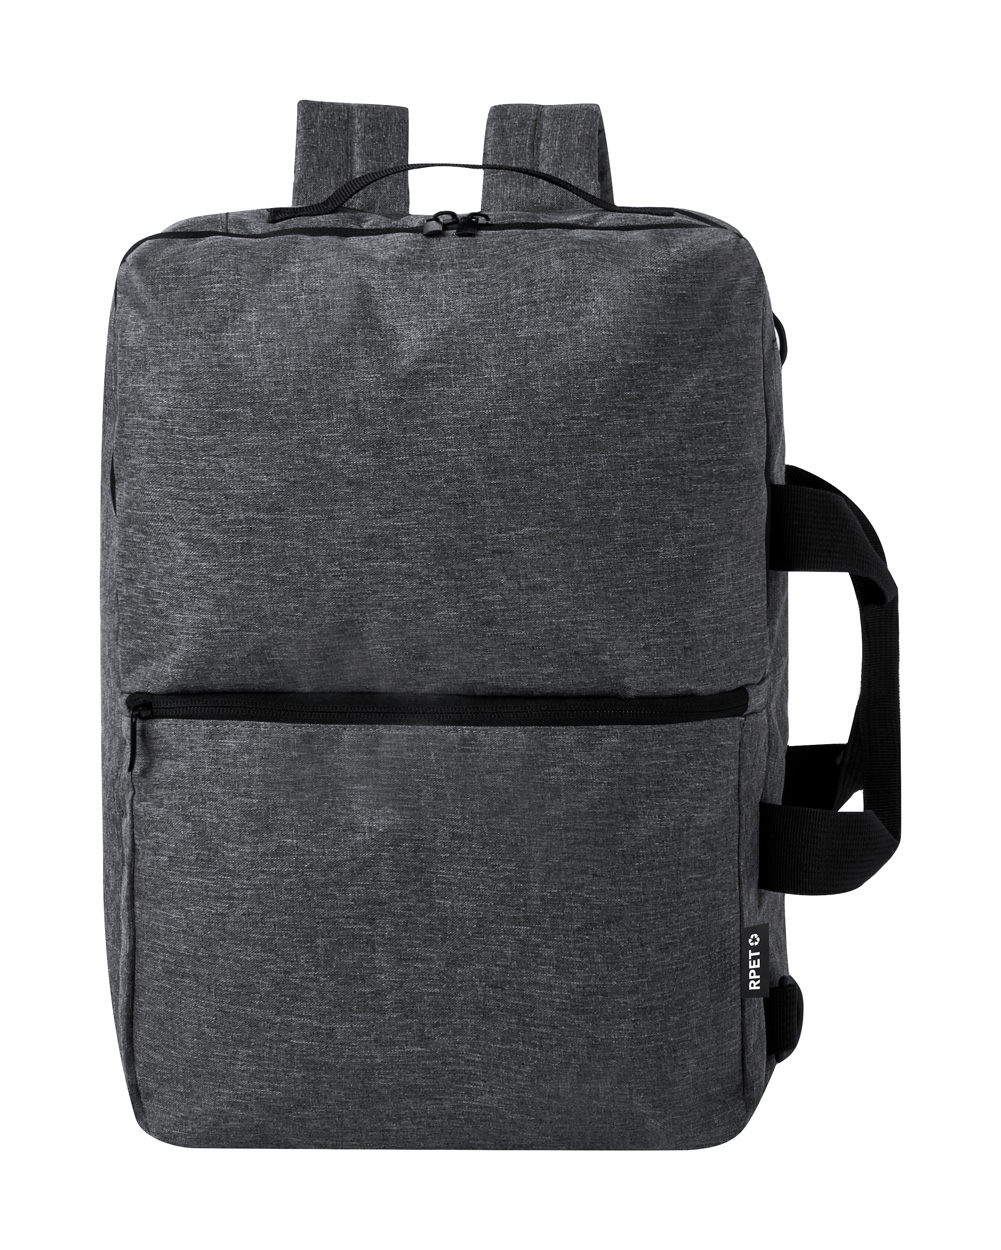 Makarzur RPET document backpack